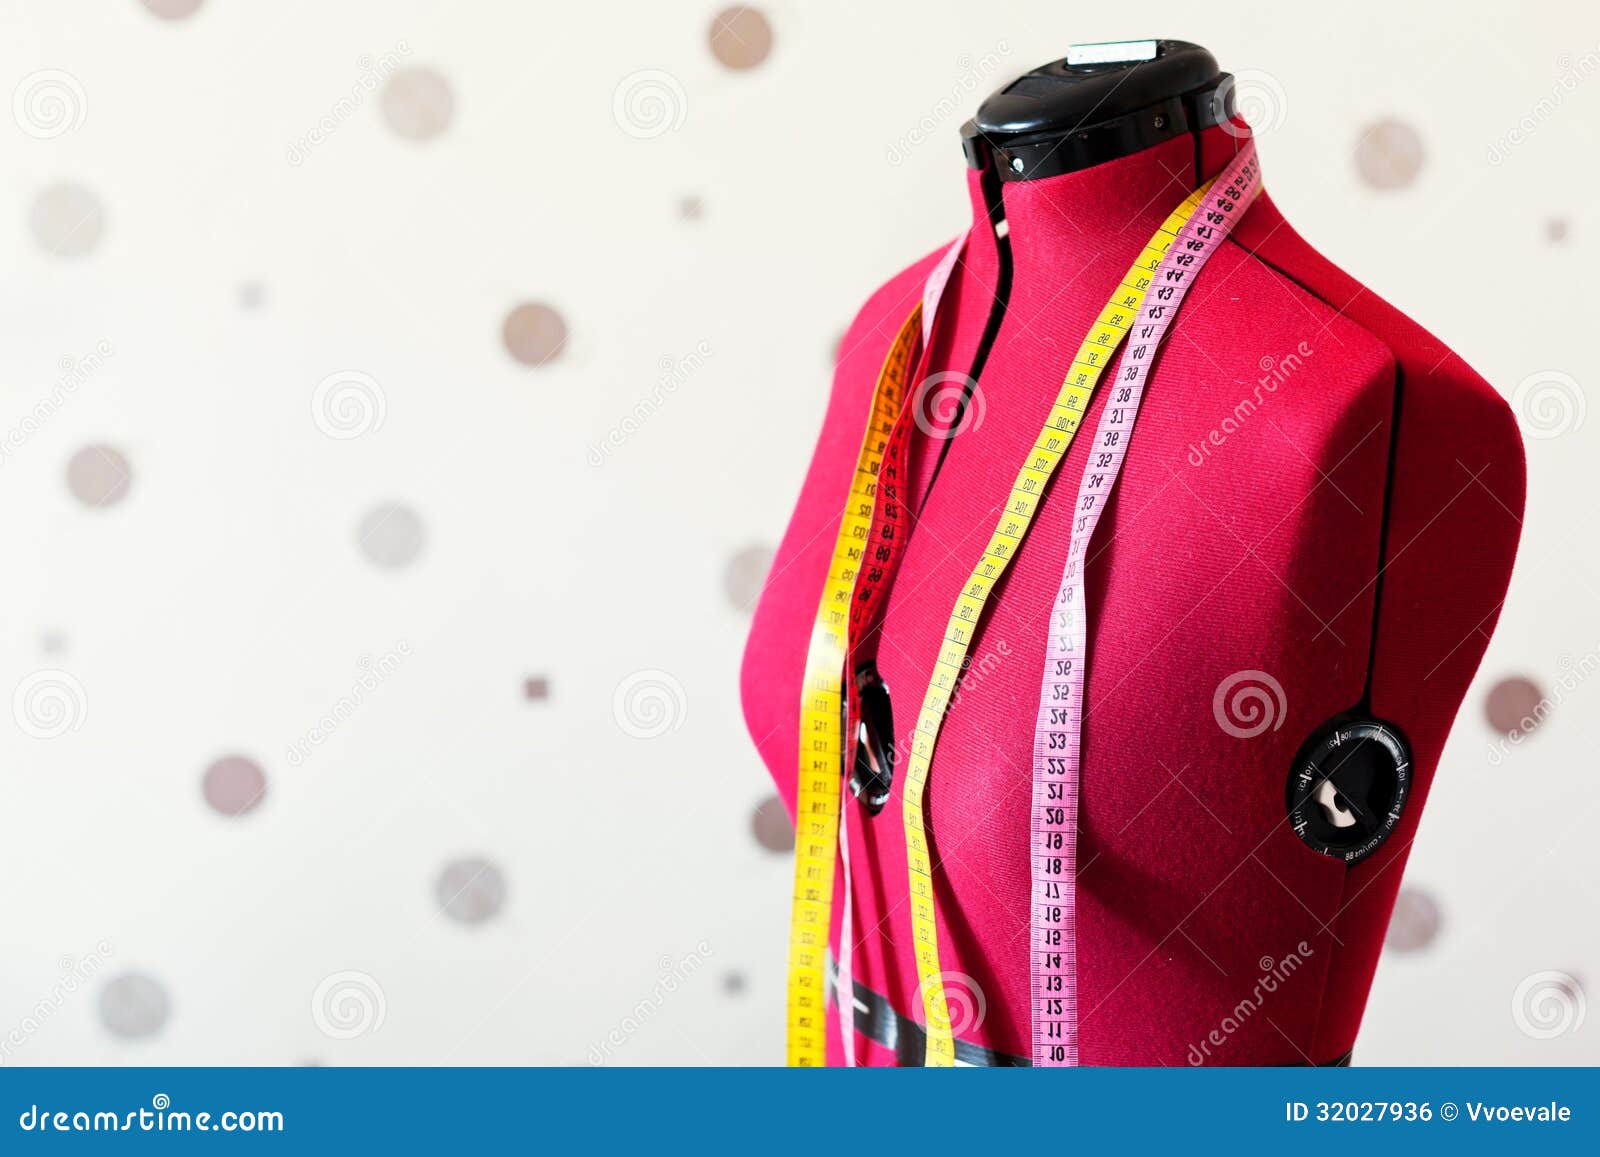 https://thumbs.dreamstime.com/z/red-tailors-dummy-mannequin-two-measure-tapes-32027936.jpg